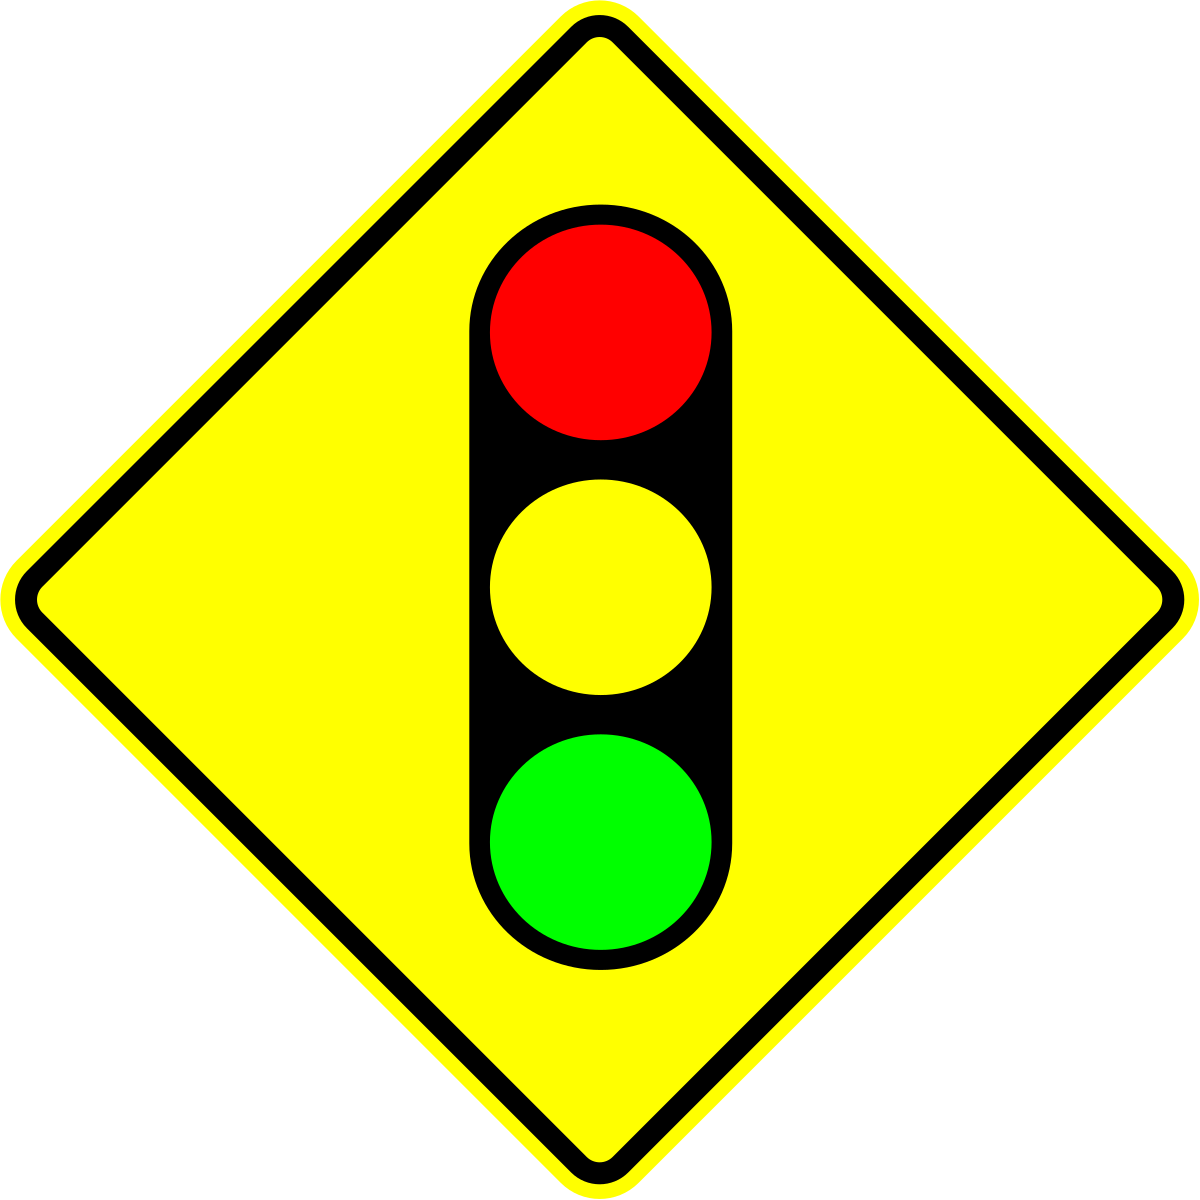 Melting sten Morse kode File:Liberian Road Signs - Warning Sign - Traffic signals ahead.svg -  Wikimedia Commons